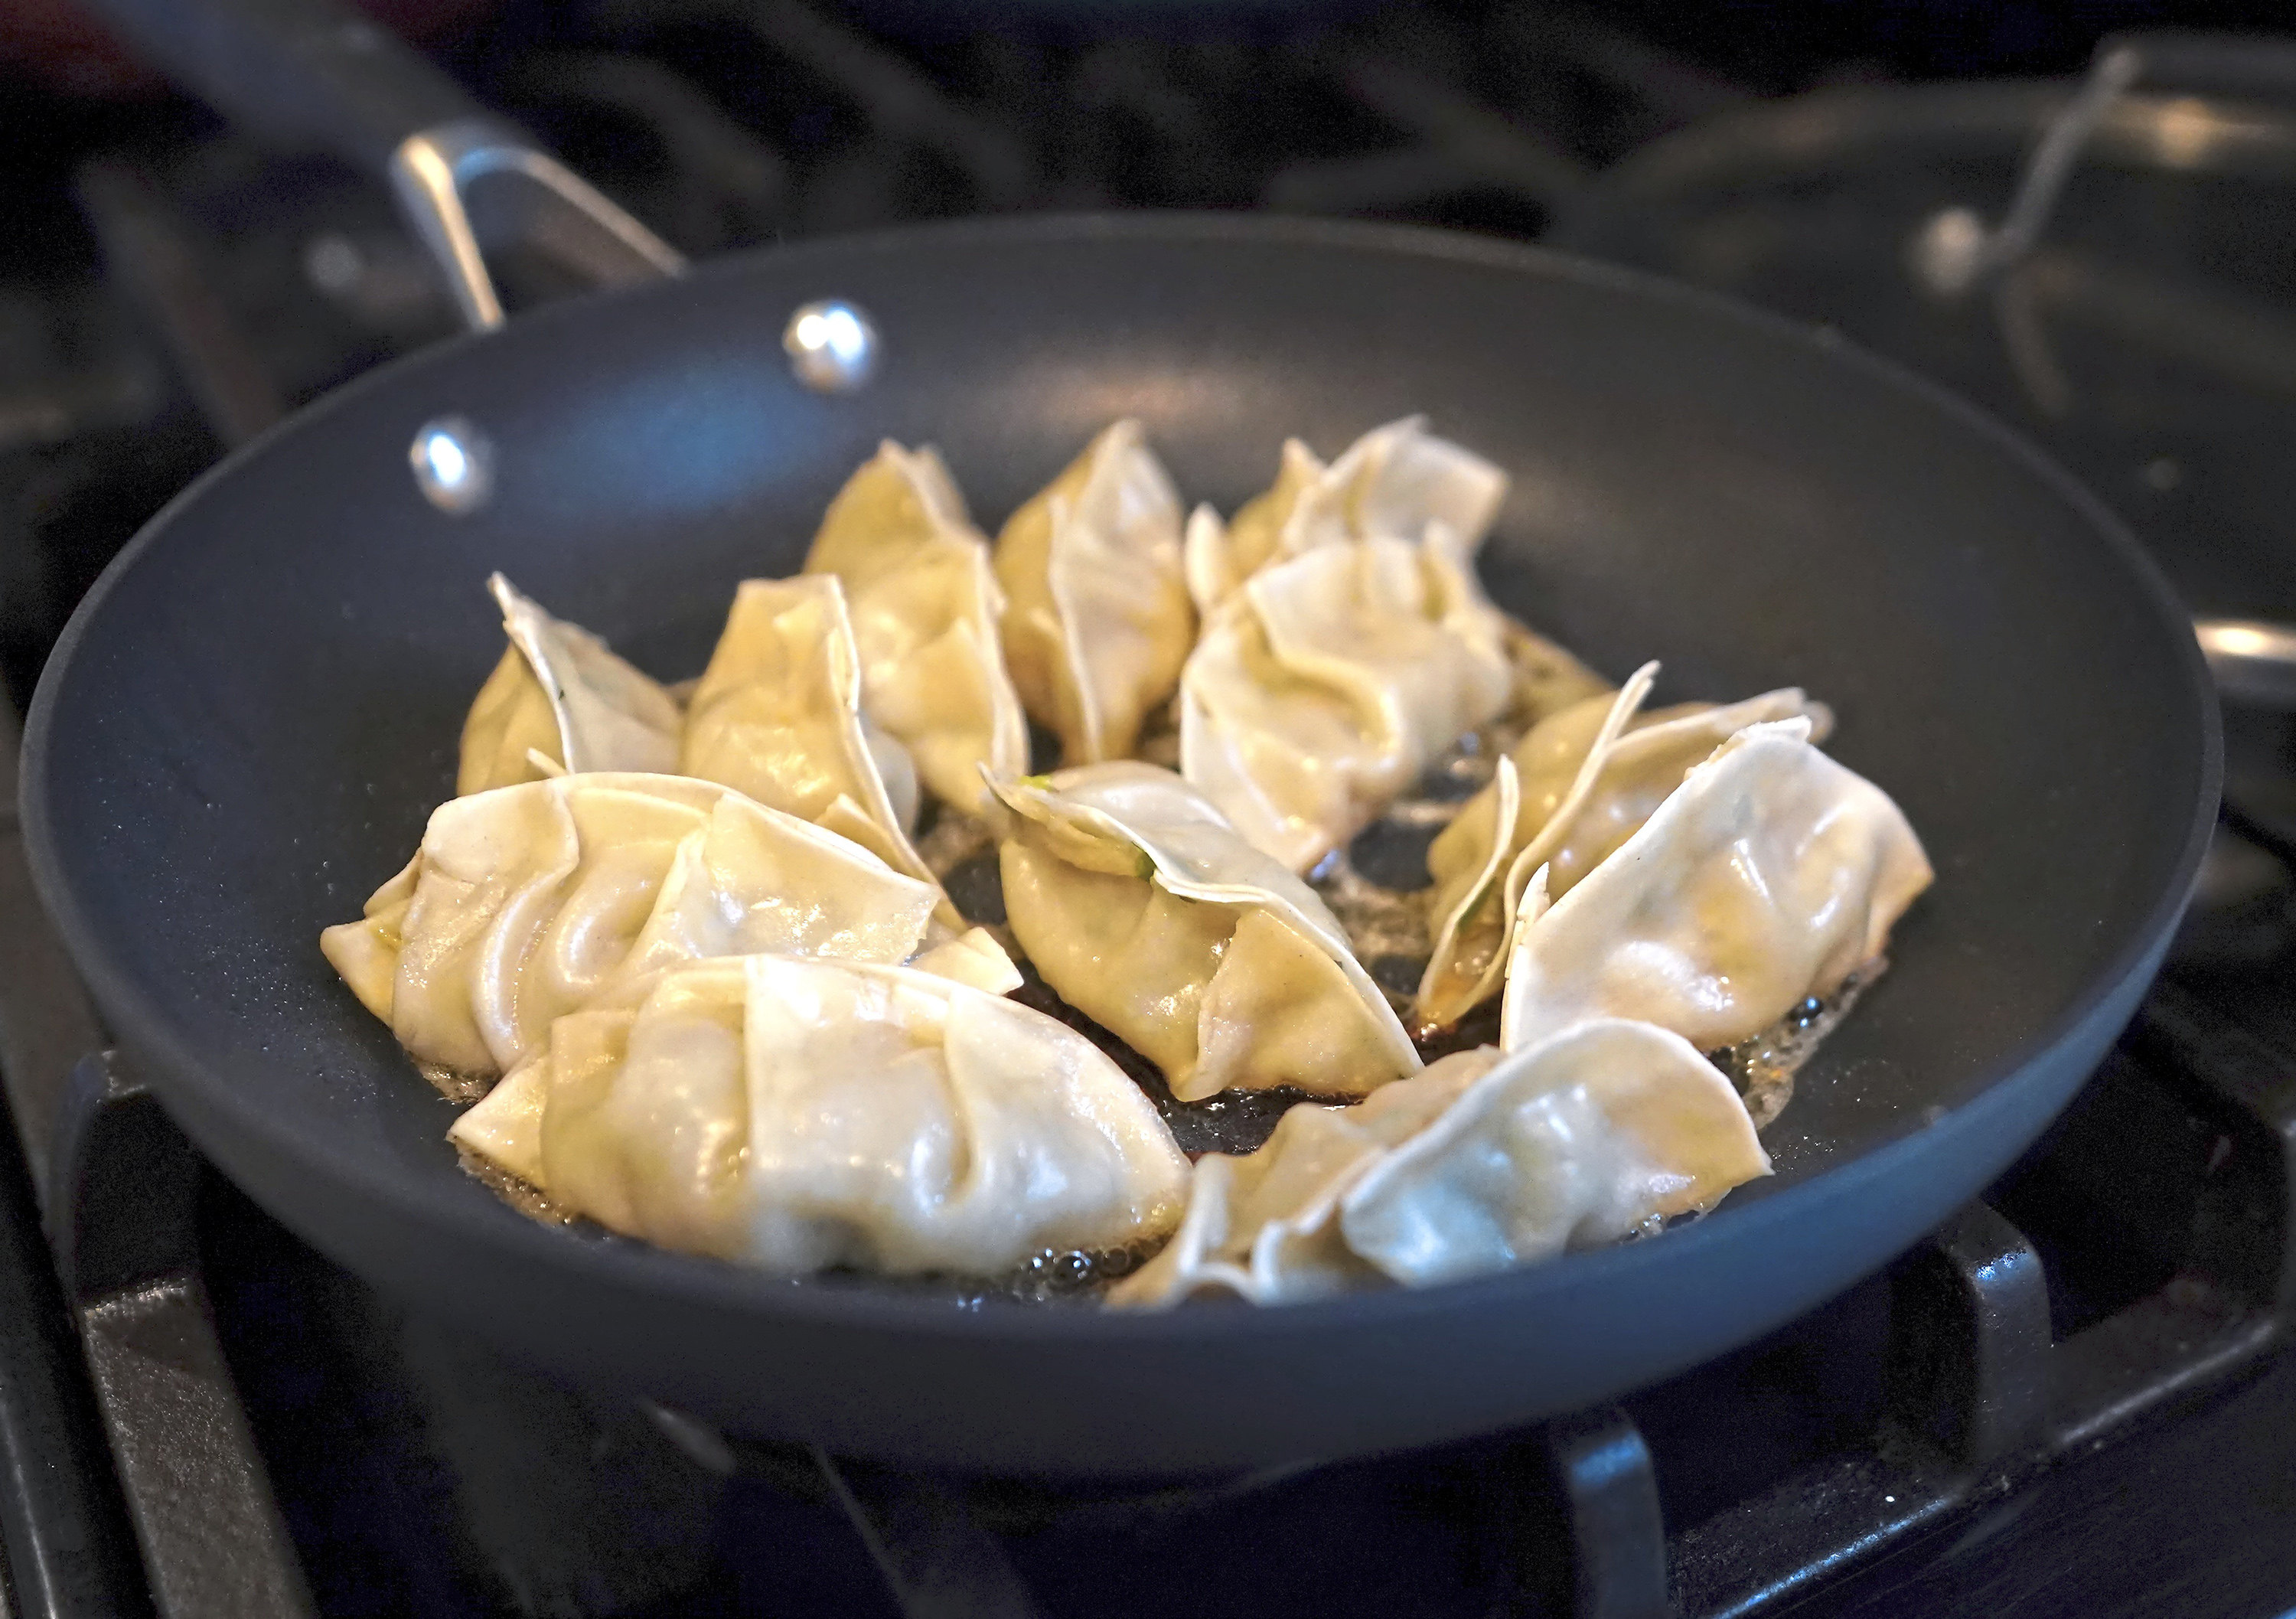 Home-made gyoza dumplings frying. Rie McClenny missed them so much during a year abroad in rural America she began making her own. Now she’s a YouTube regular with her own cookbook. Photo: TNS